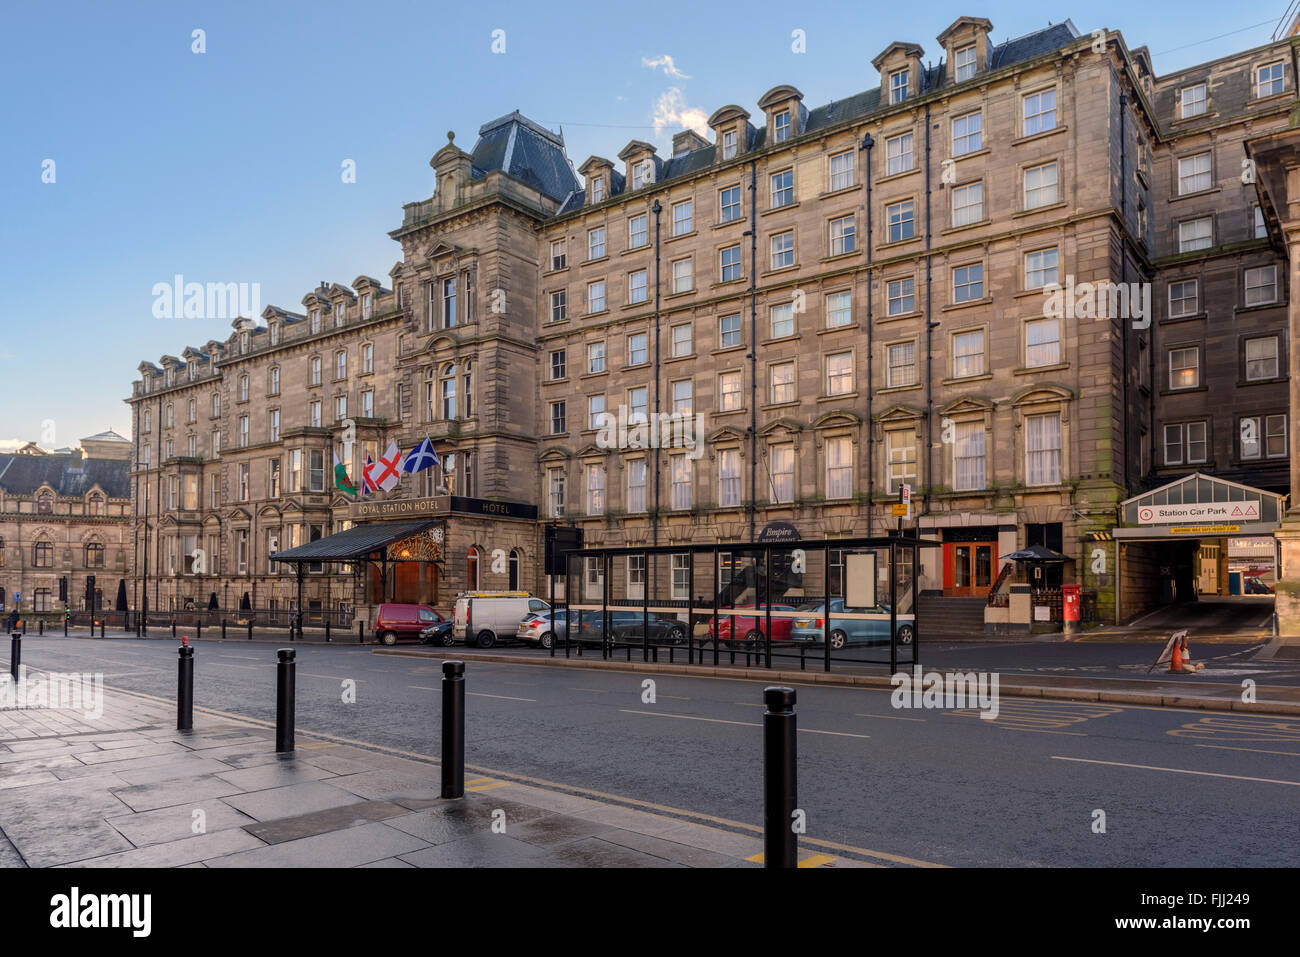 Le Royal Station Hotel Newcastle upon Tyne Banque D'Images